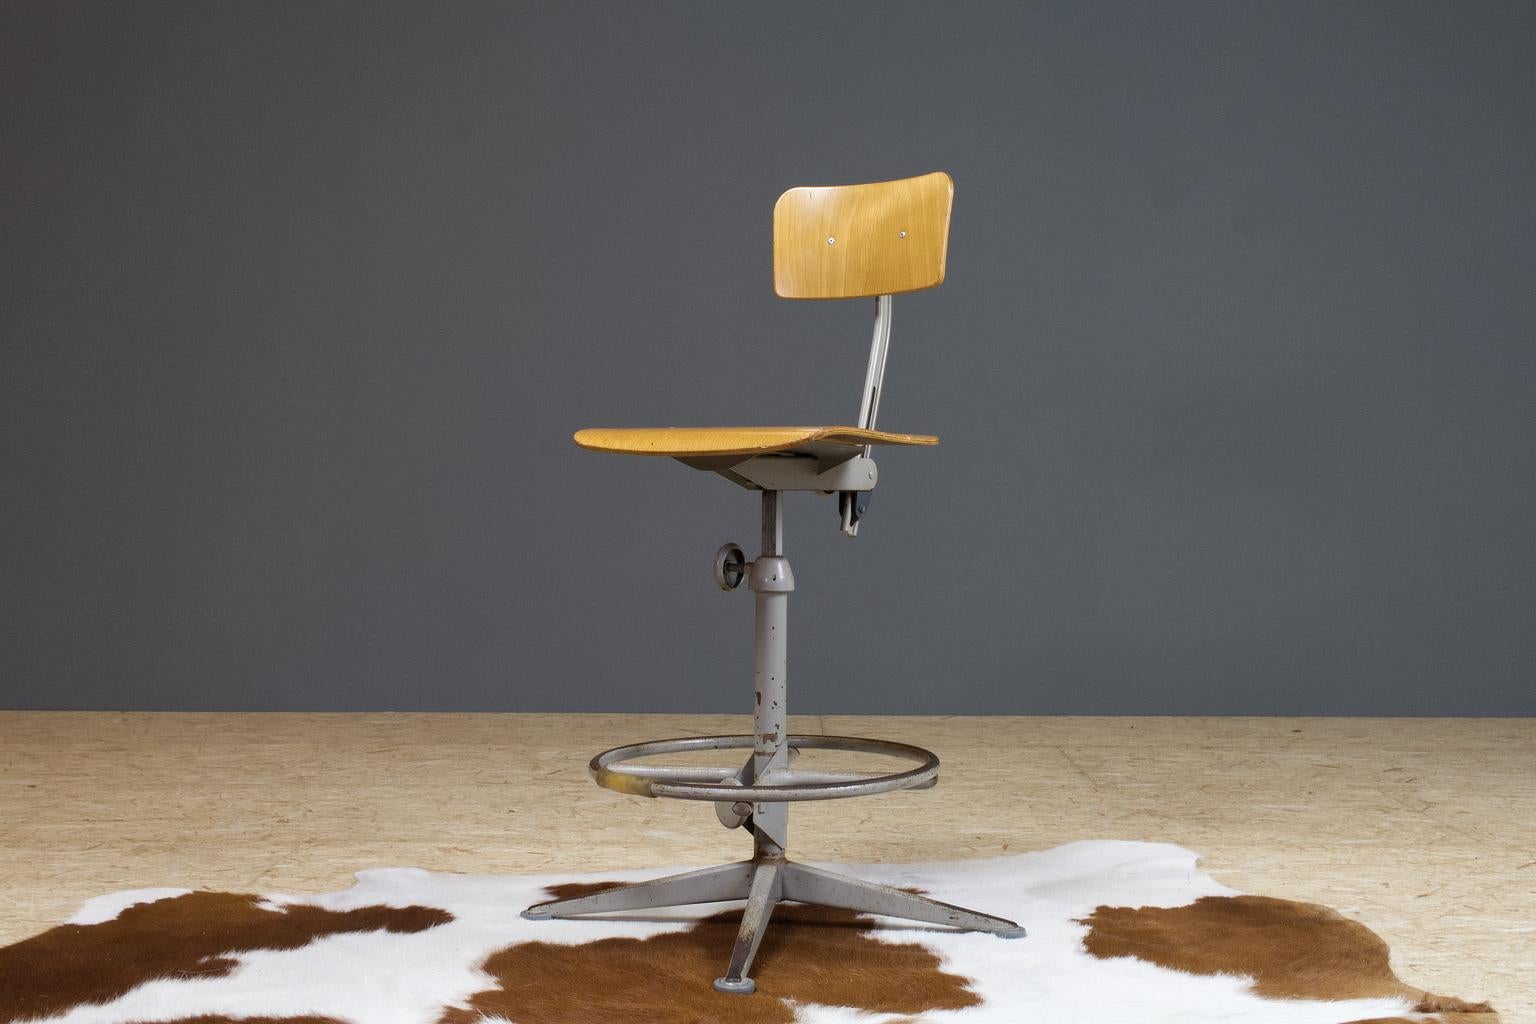 1963 Dutch Friso Kramer drawing board or architect chair by Ahrend de Cirkel. Light brown plywood and grey metal, adjustable in height and rotatable. This piece has a circular footrest, which is less common and therefor a great detail to this